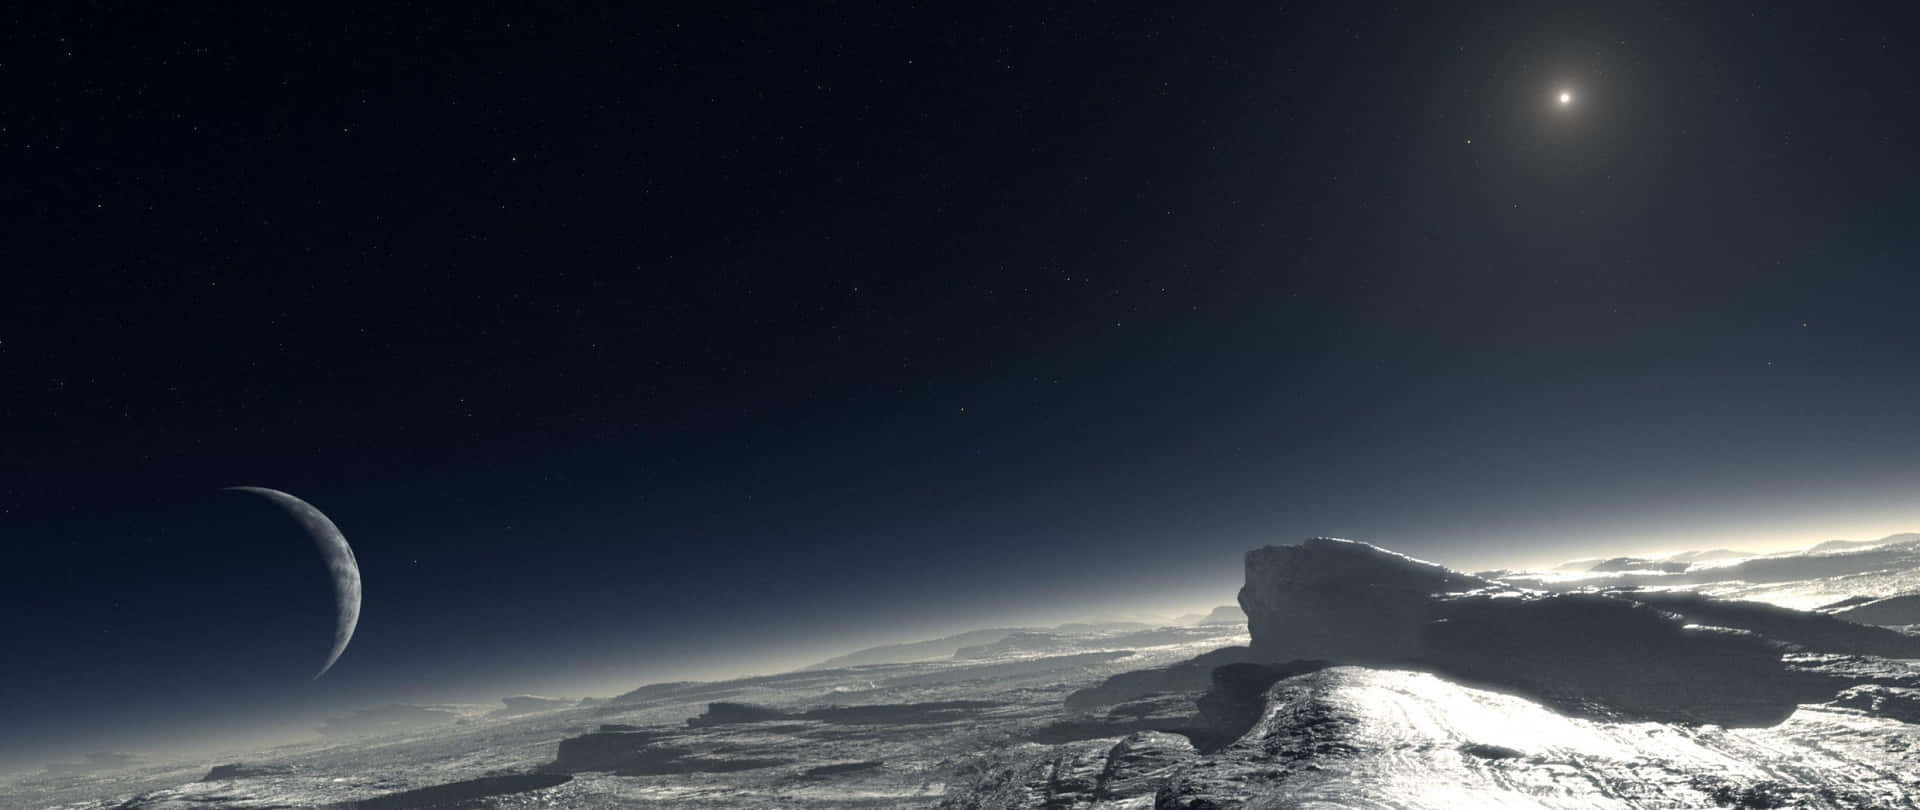 Explore the wonders of the distant planet Pluto